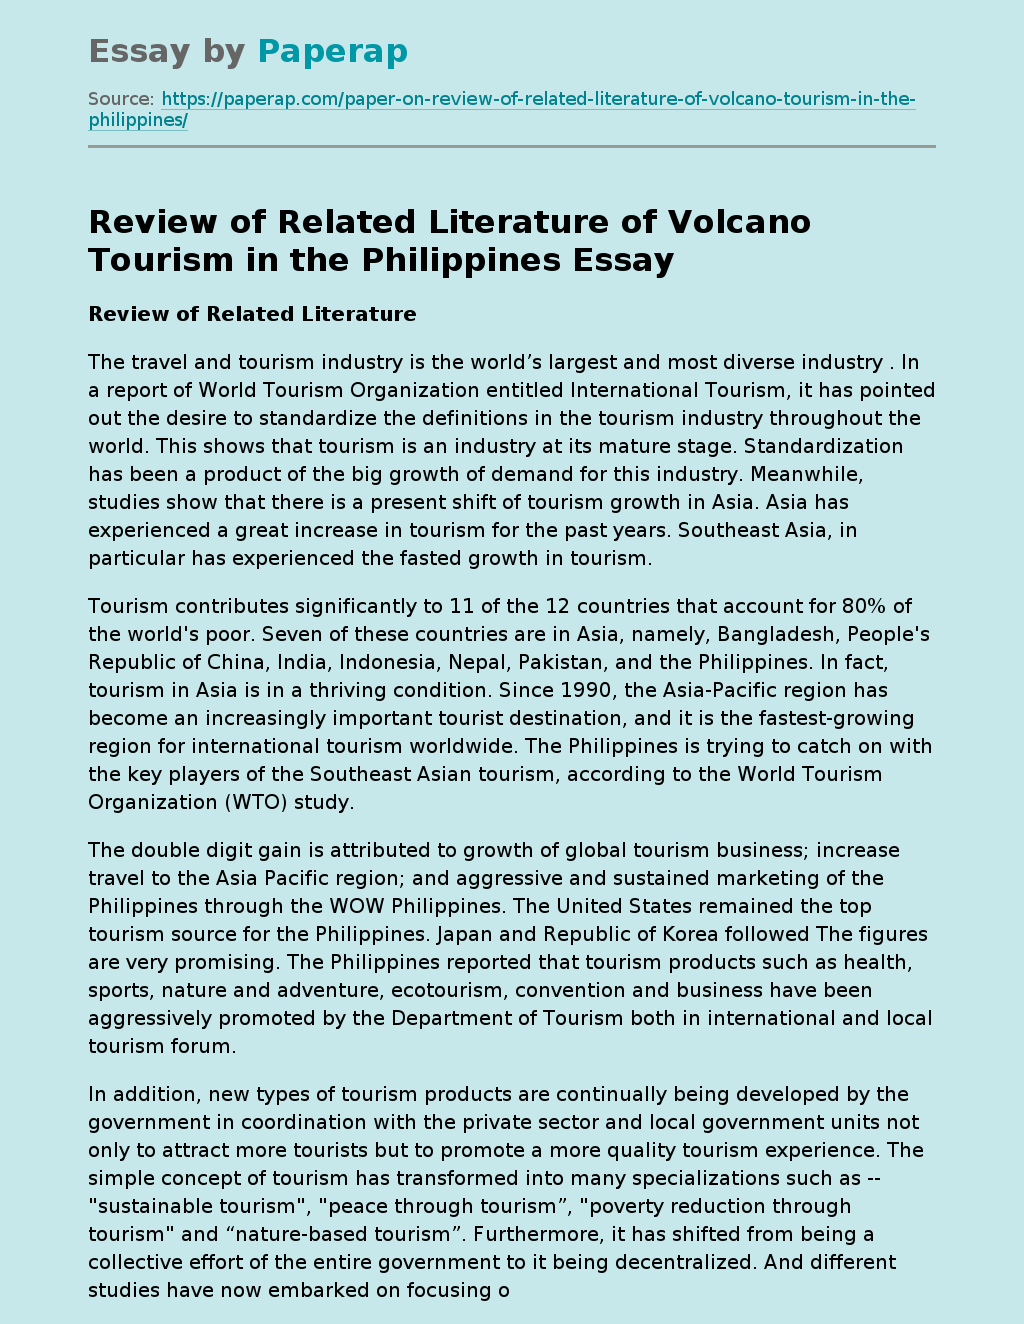 Review of Related Literature of Volcano Tourism in the Philippines